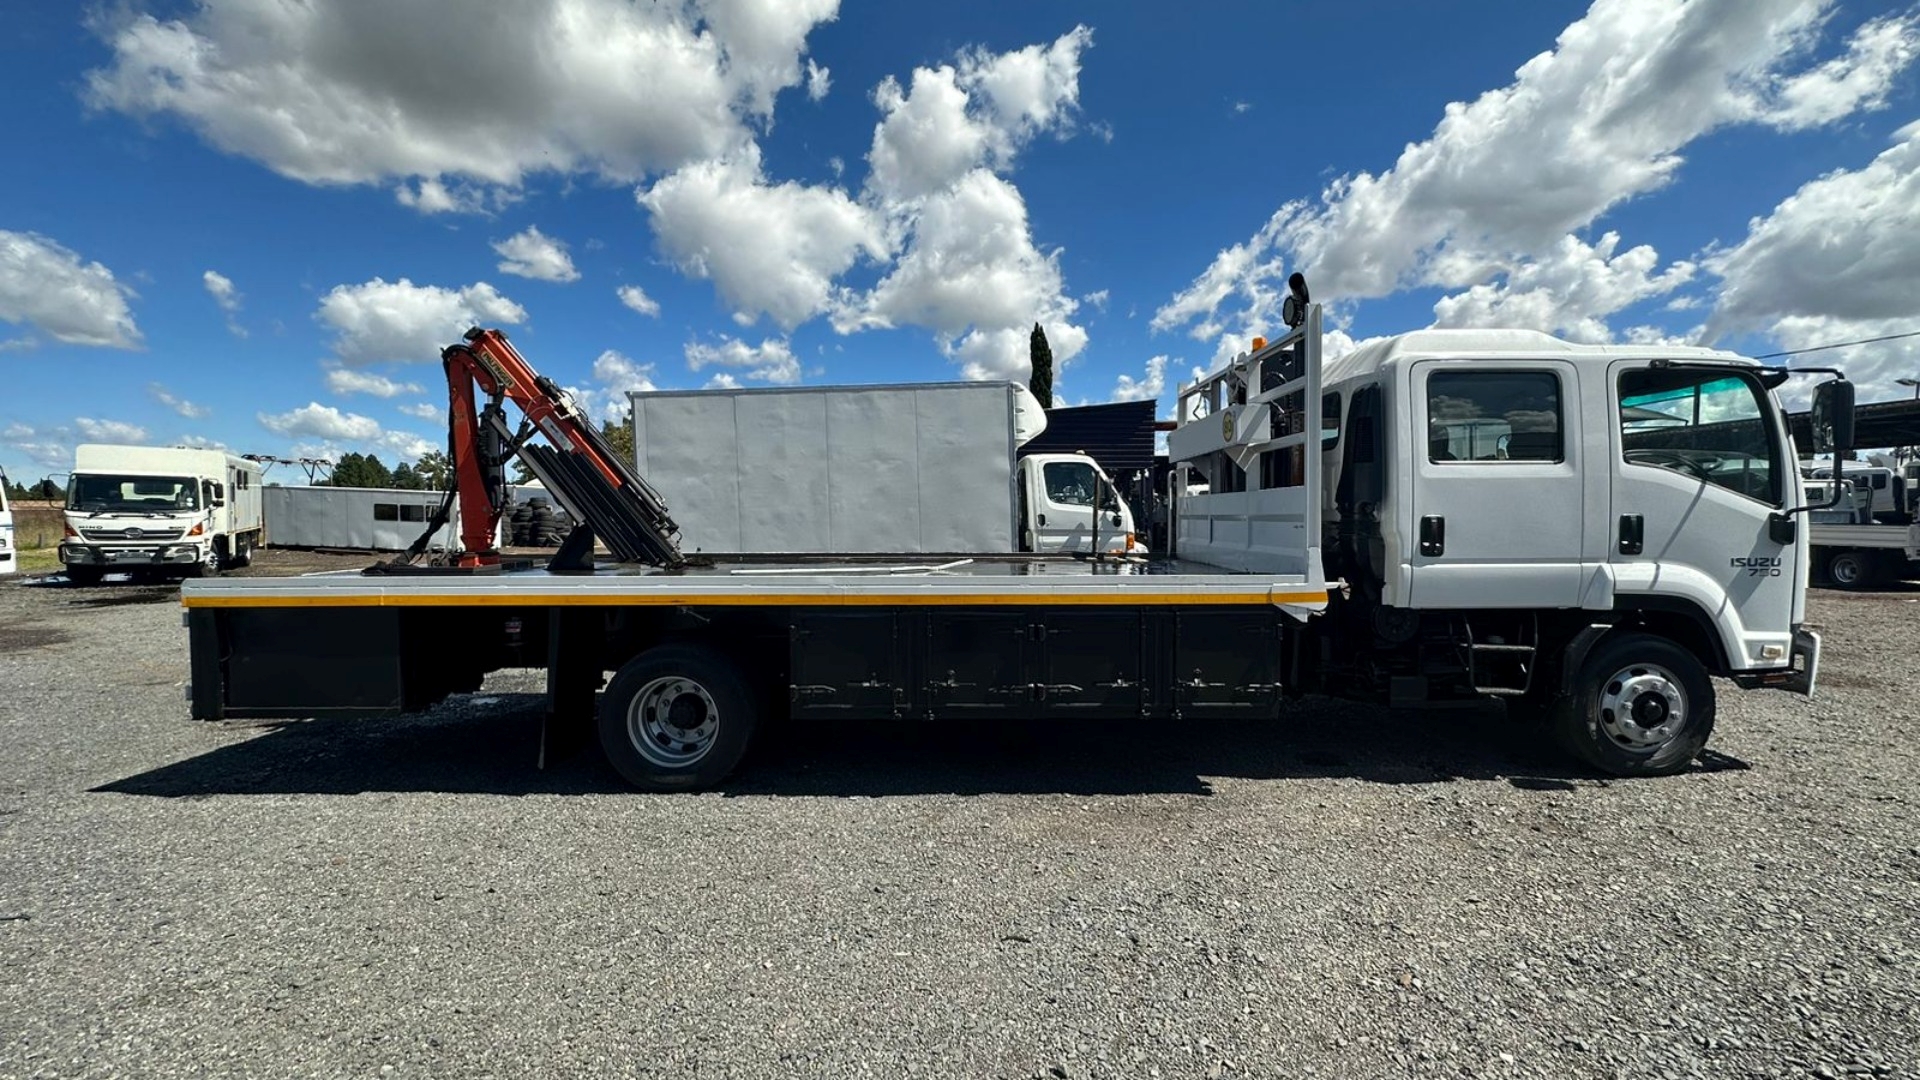 Isuzu Truck FSR 750 CREW CAB WITH CRANE 2011 for sale by Motordeal Truck and Commercial | Truck & Trailer Marketplace